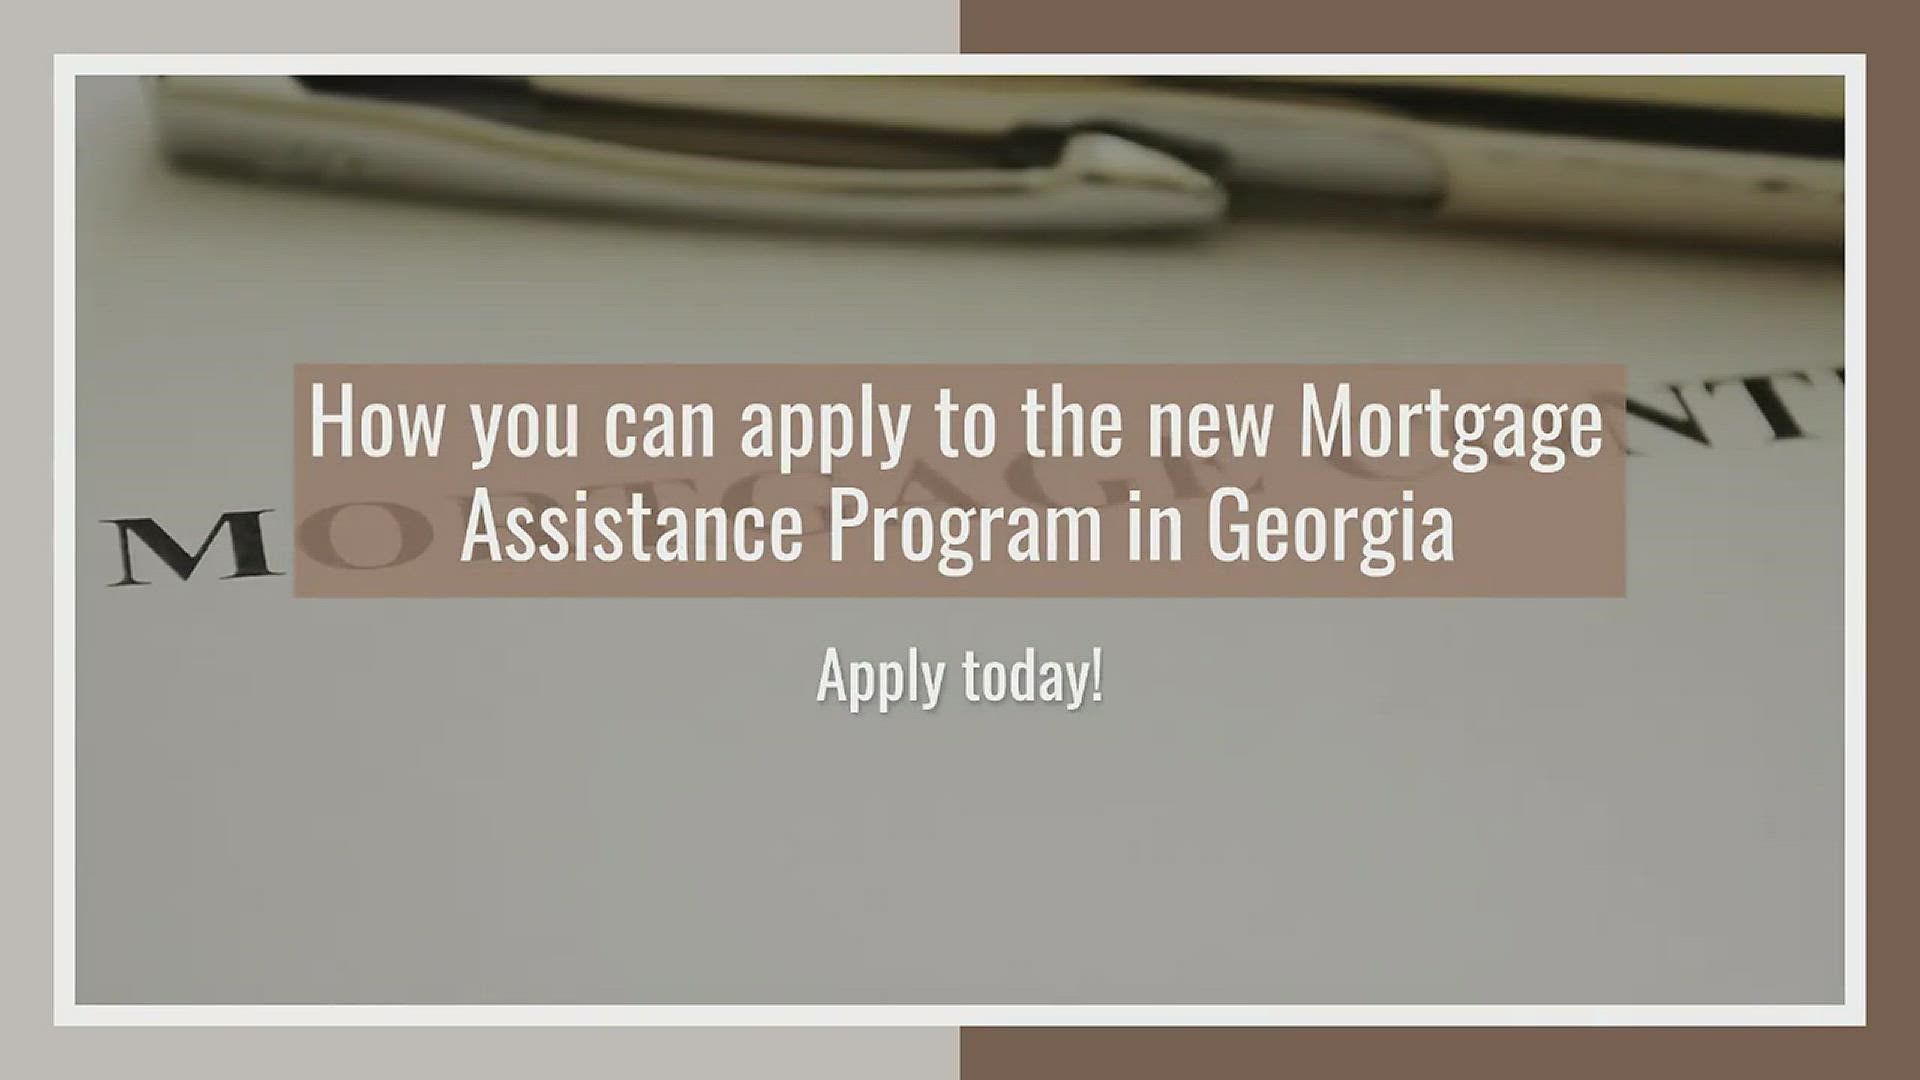 Georgia officials announced the launching of a new program designed to help provide resources for homeowners. Here is how you can apply.